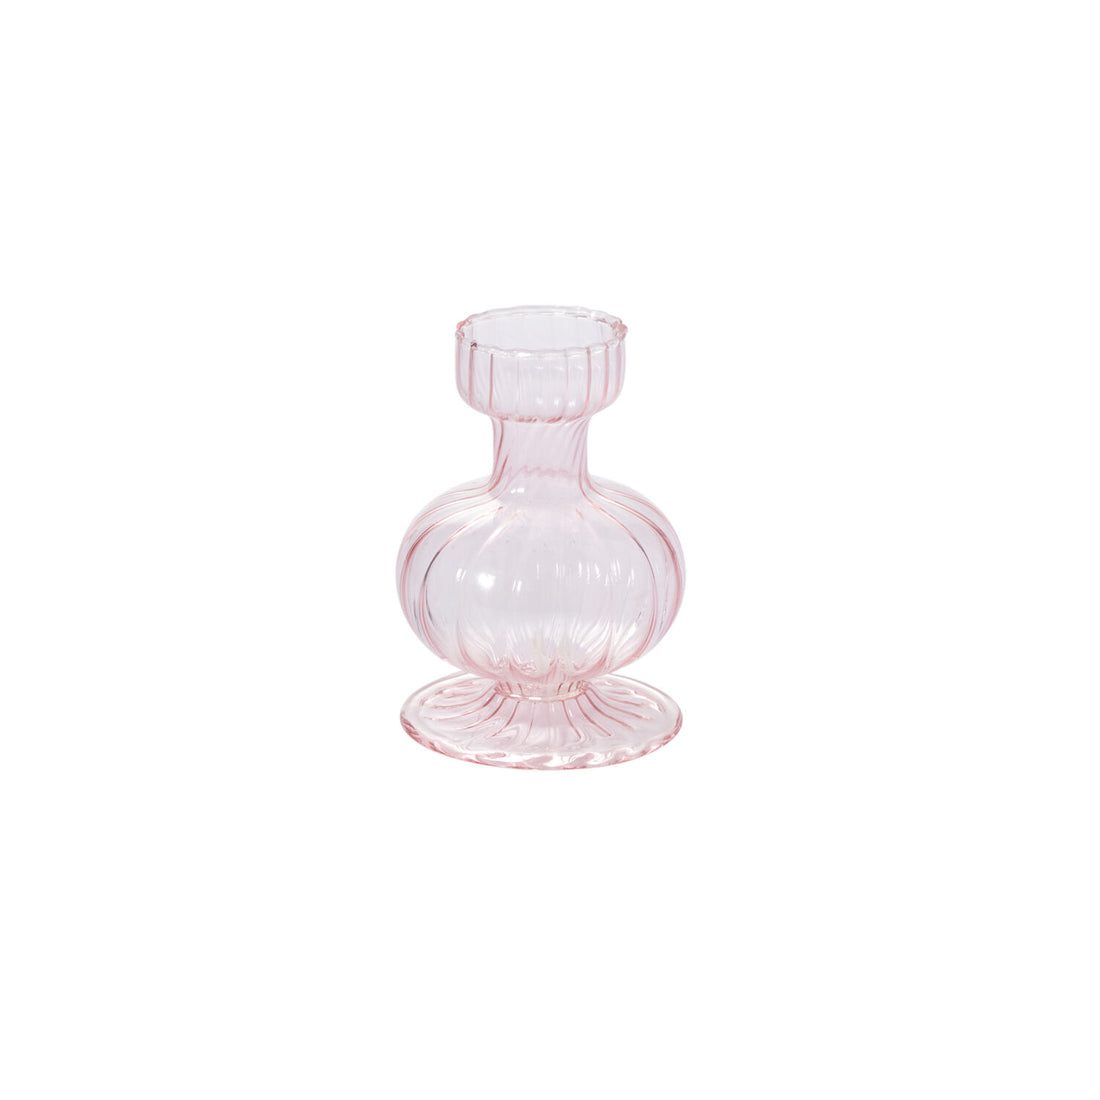 A Pink Vintage Boutique Vase from Accent Decor with a pink glass design sitting on top of a marble table.